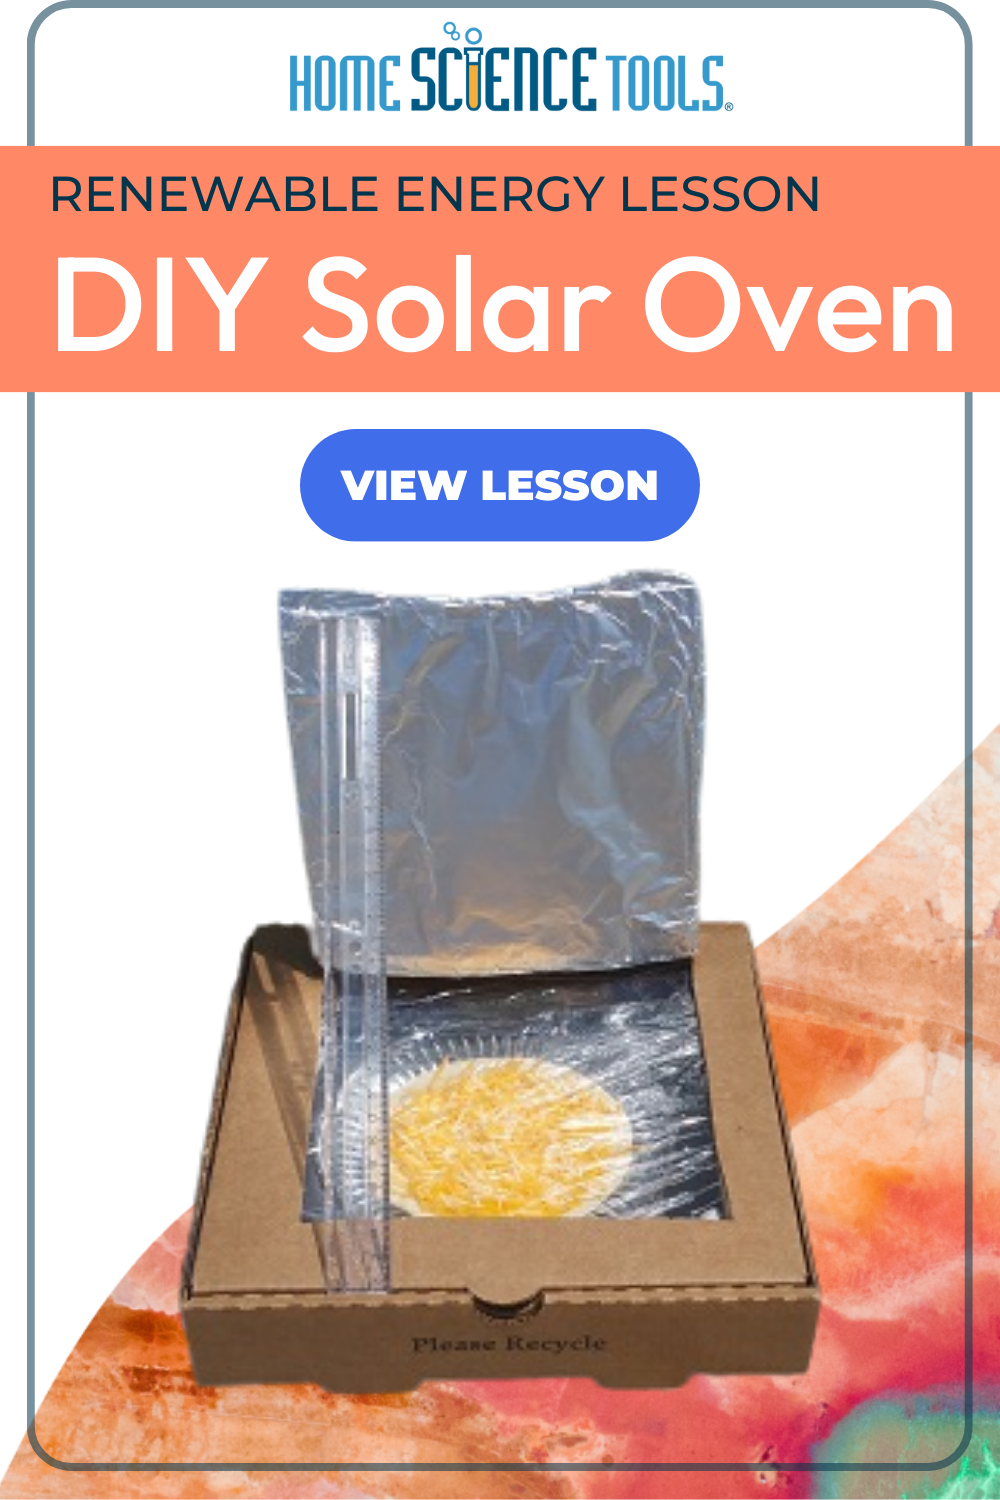 Cooking with the Sun - Creating a Solar Oven - Activity